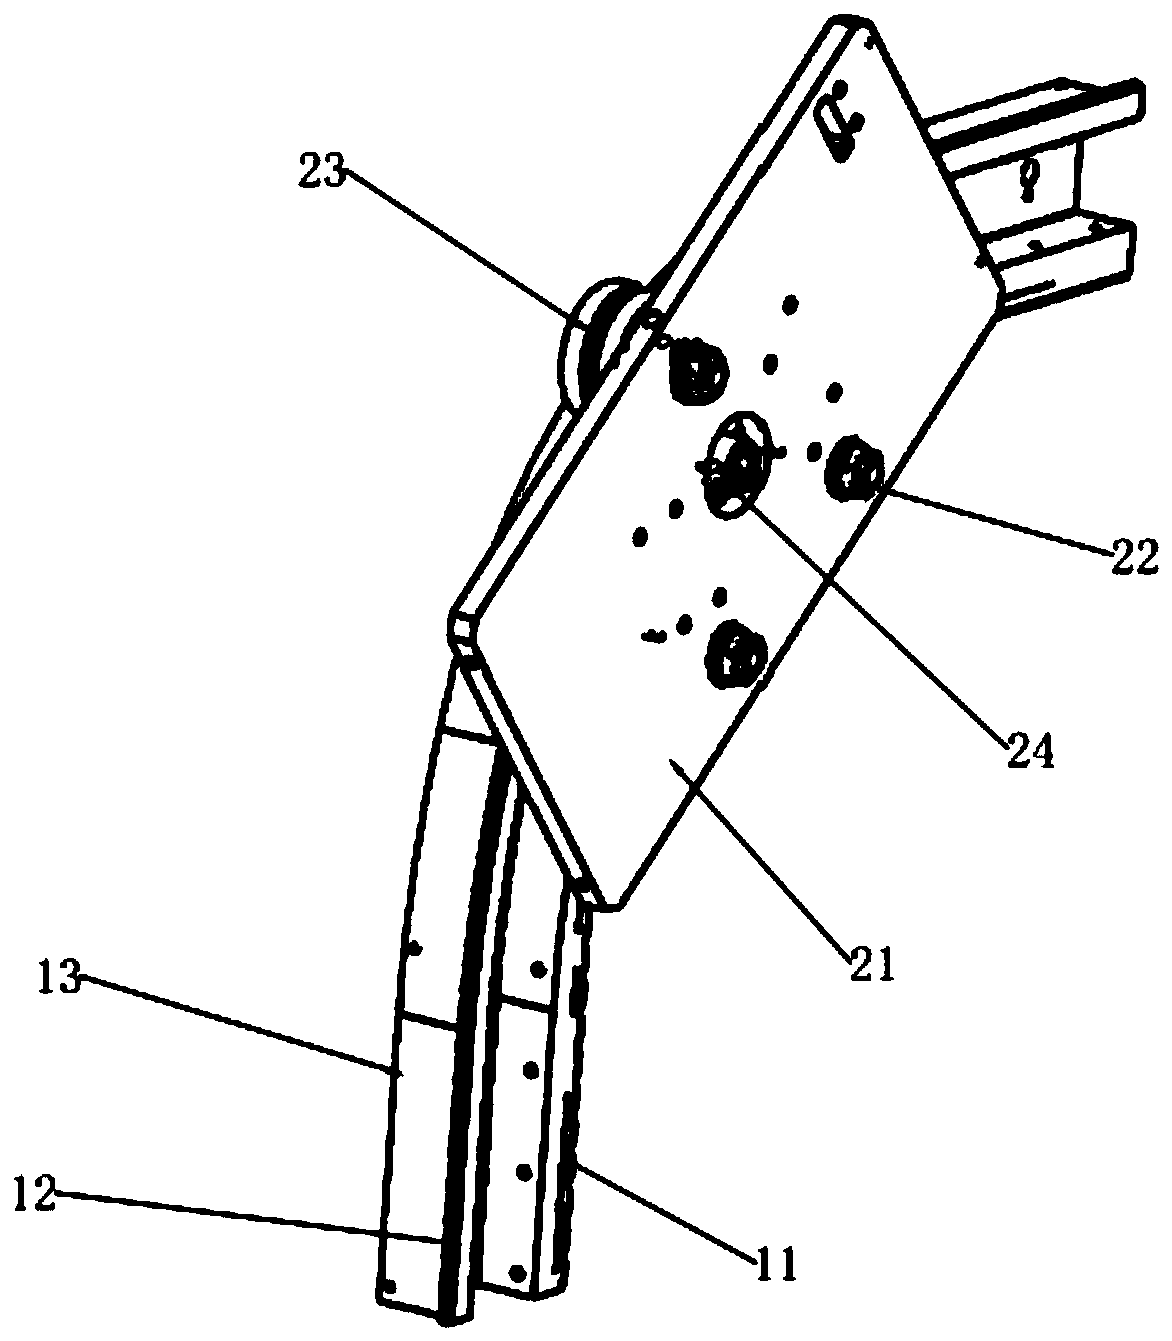 Design method of track and track